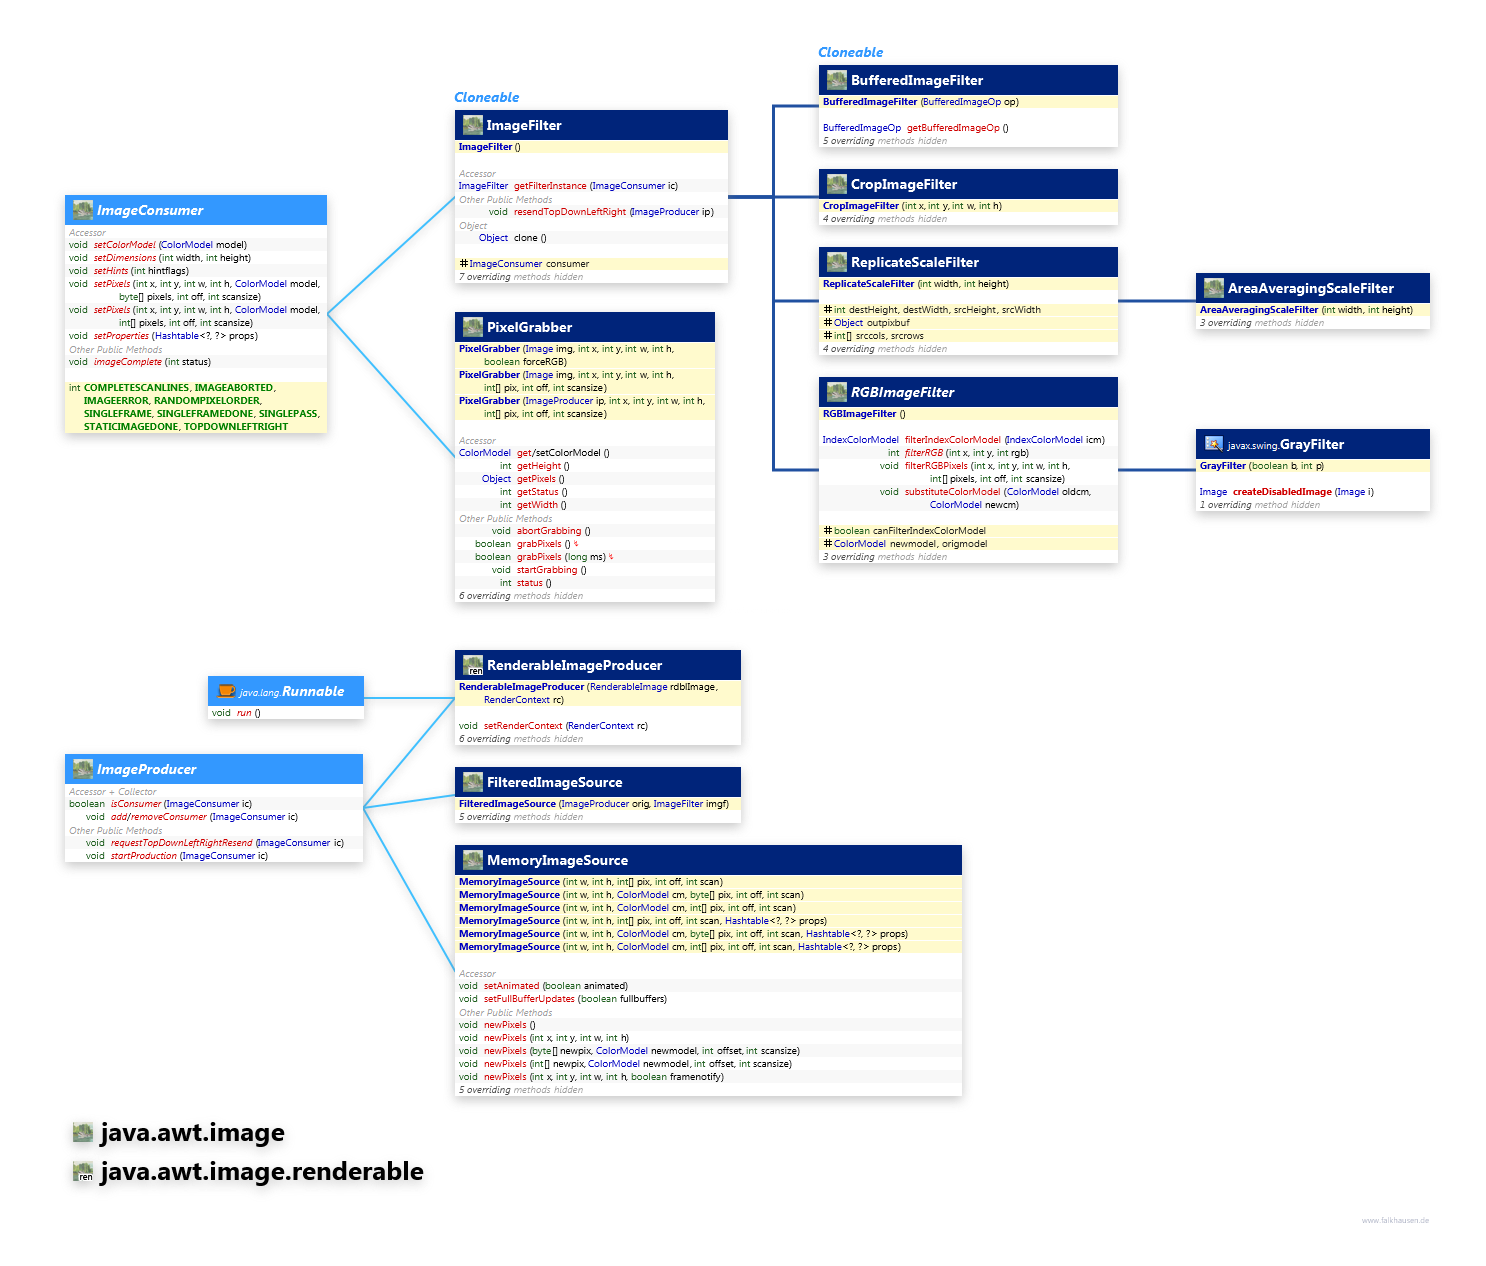 java.awt.image java.awt.image.renderable Consumer, Producer class diagram and api documentation for Java 8